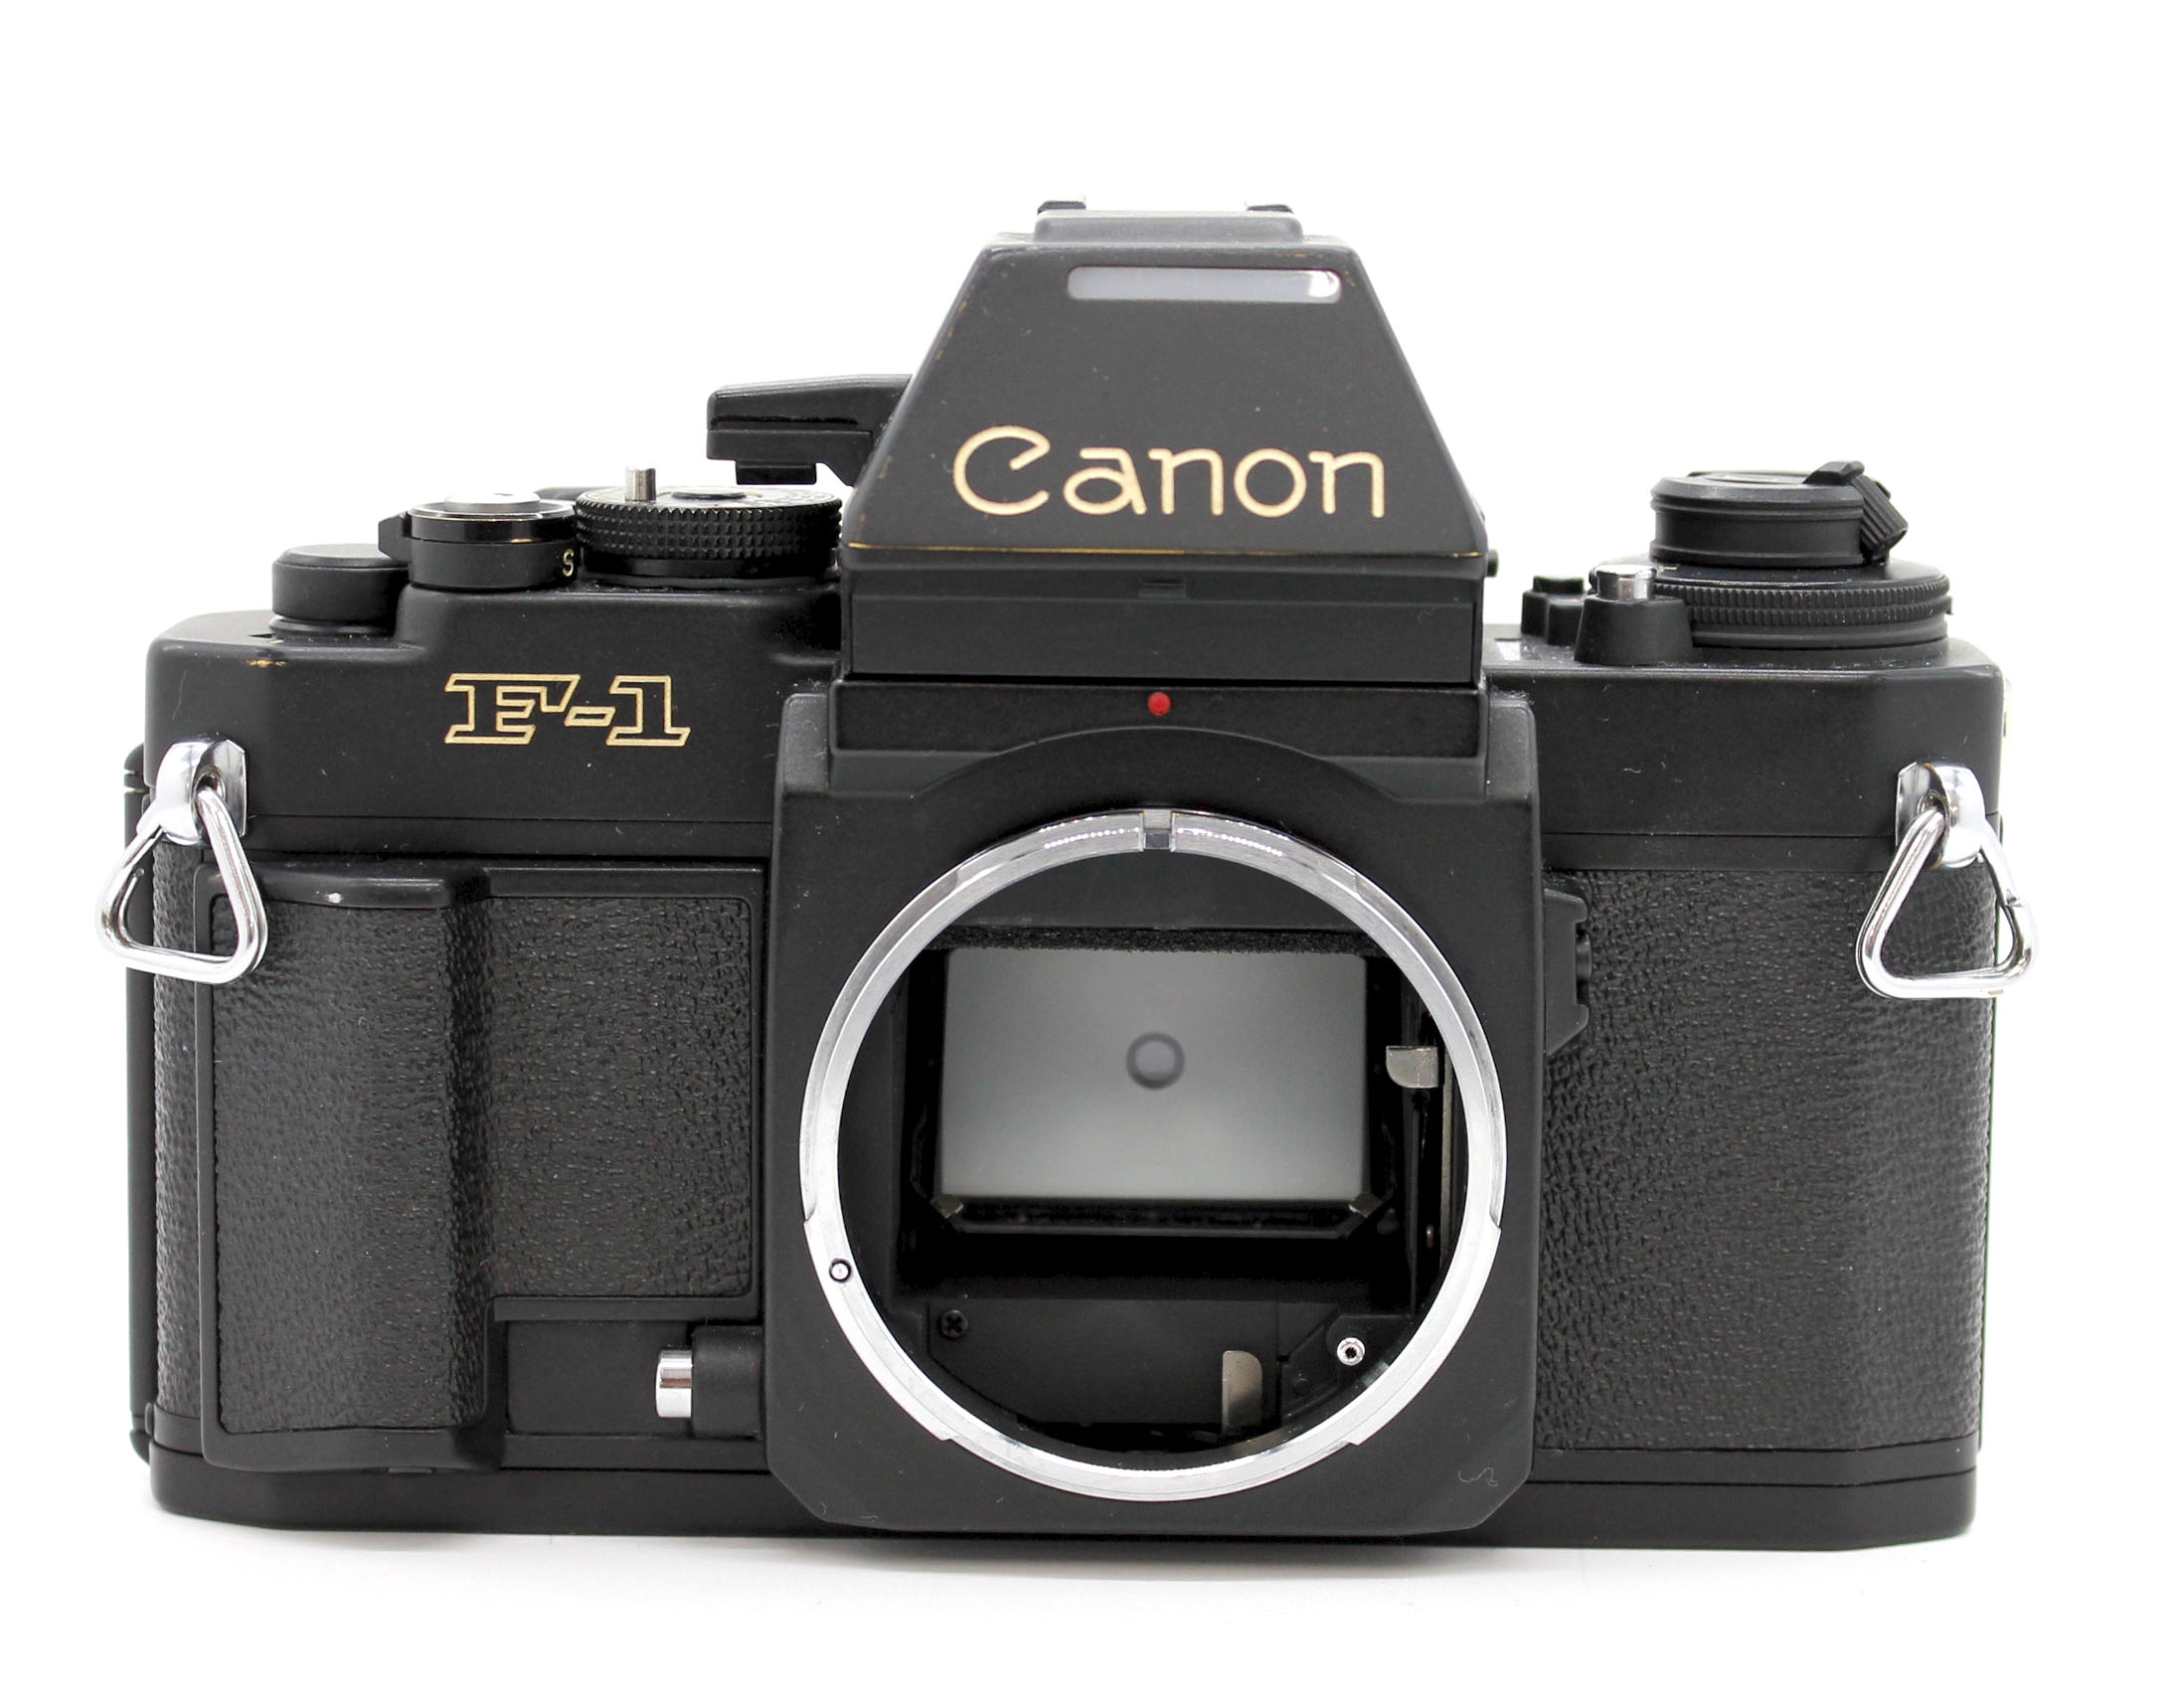  Canon New F-1 AE Finder 35mm SLR Film Camera with FD 50mm F/1.4 S.S.C. Lens from Japan Photo 3